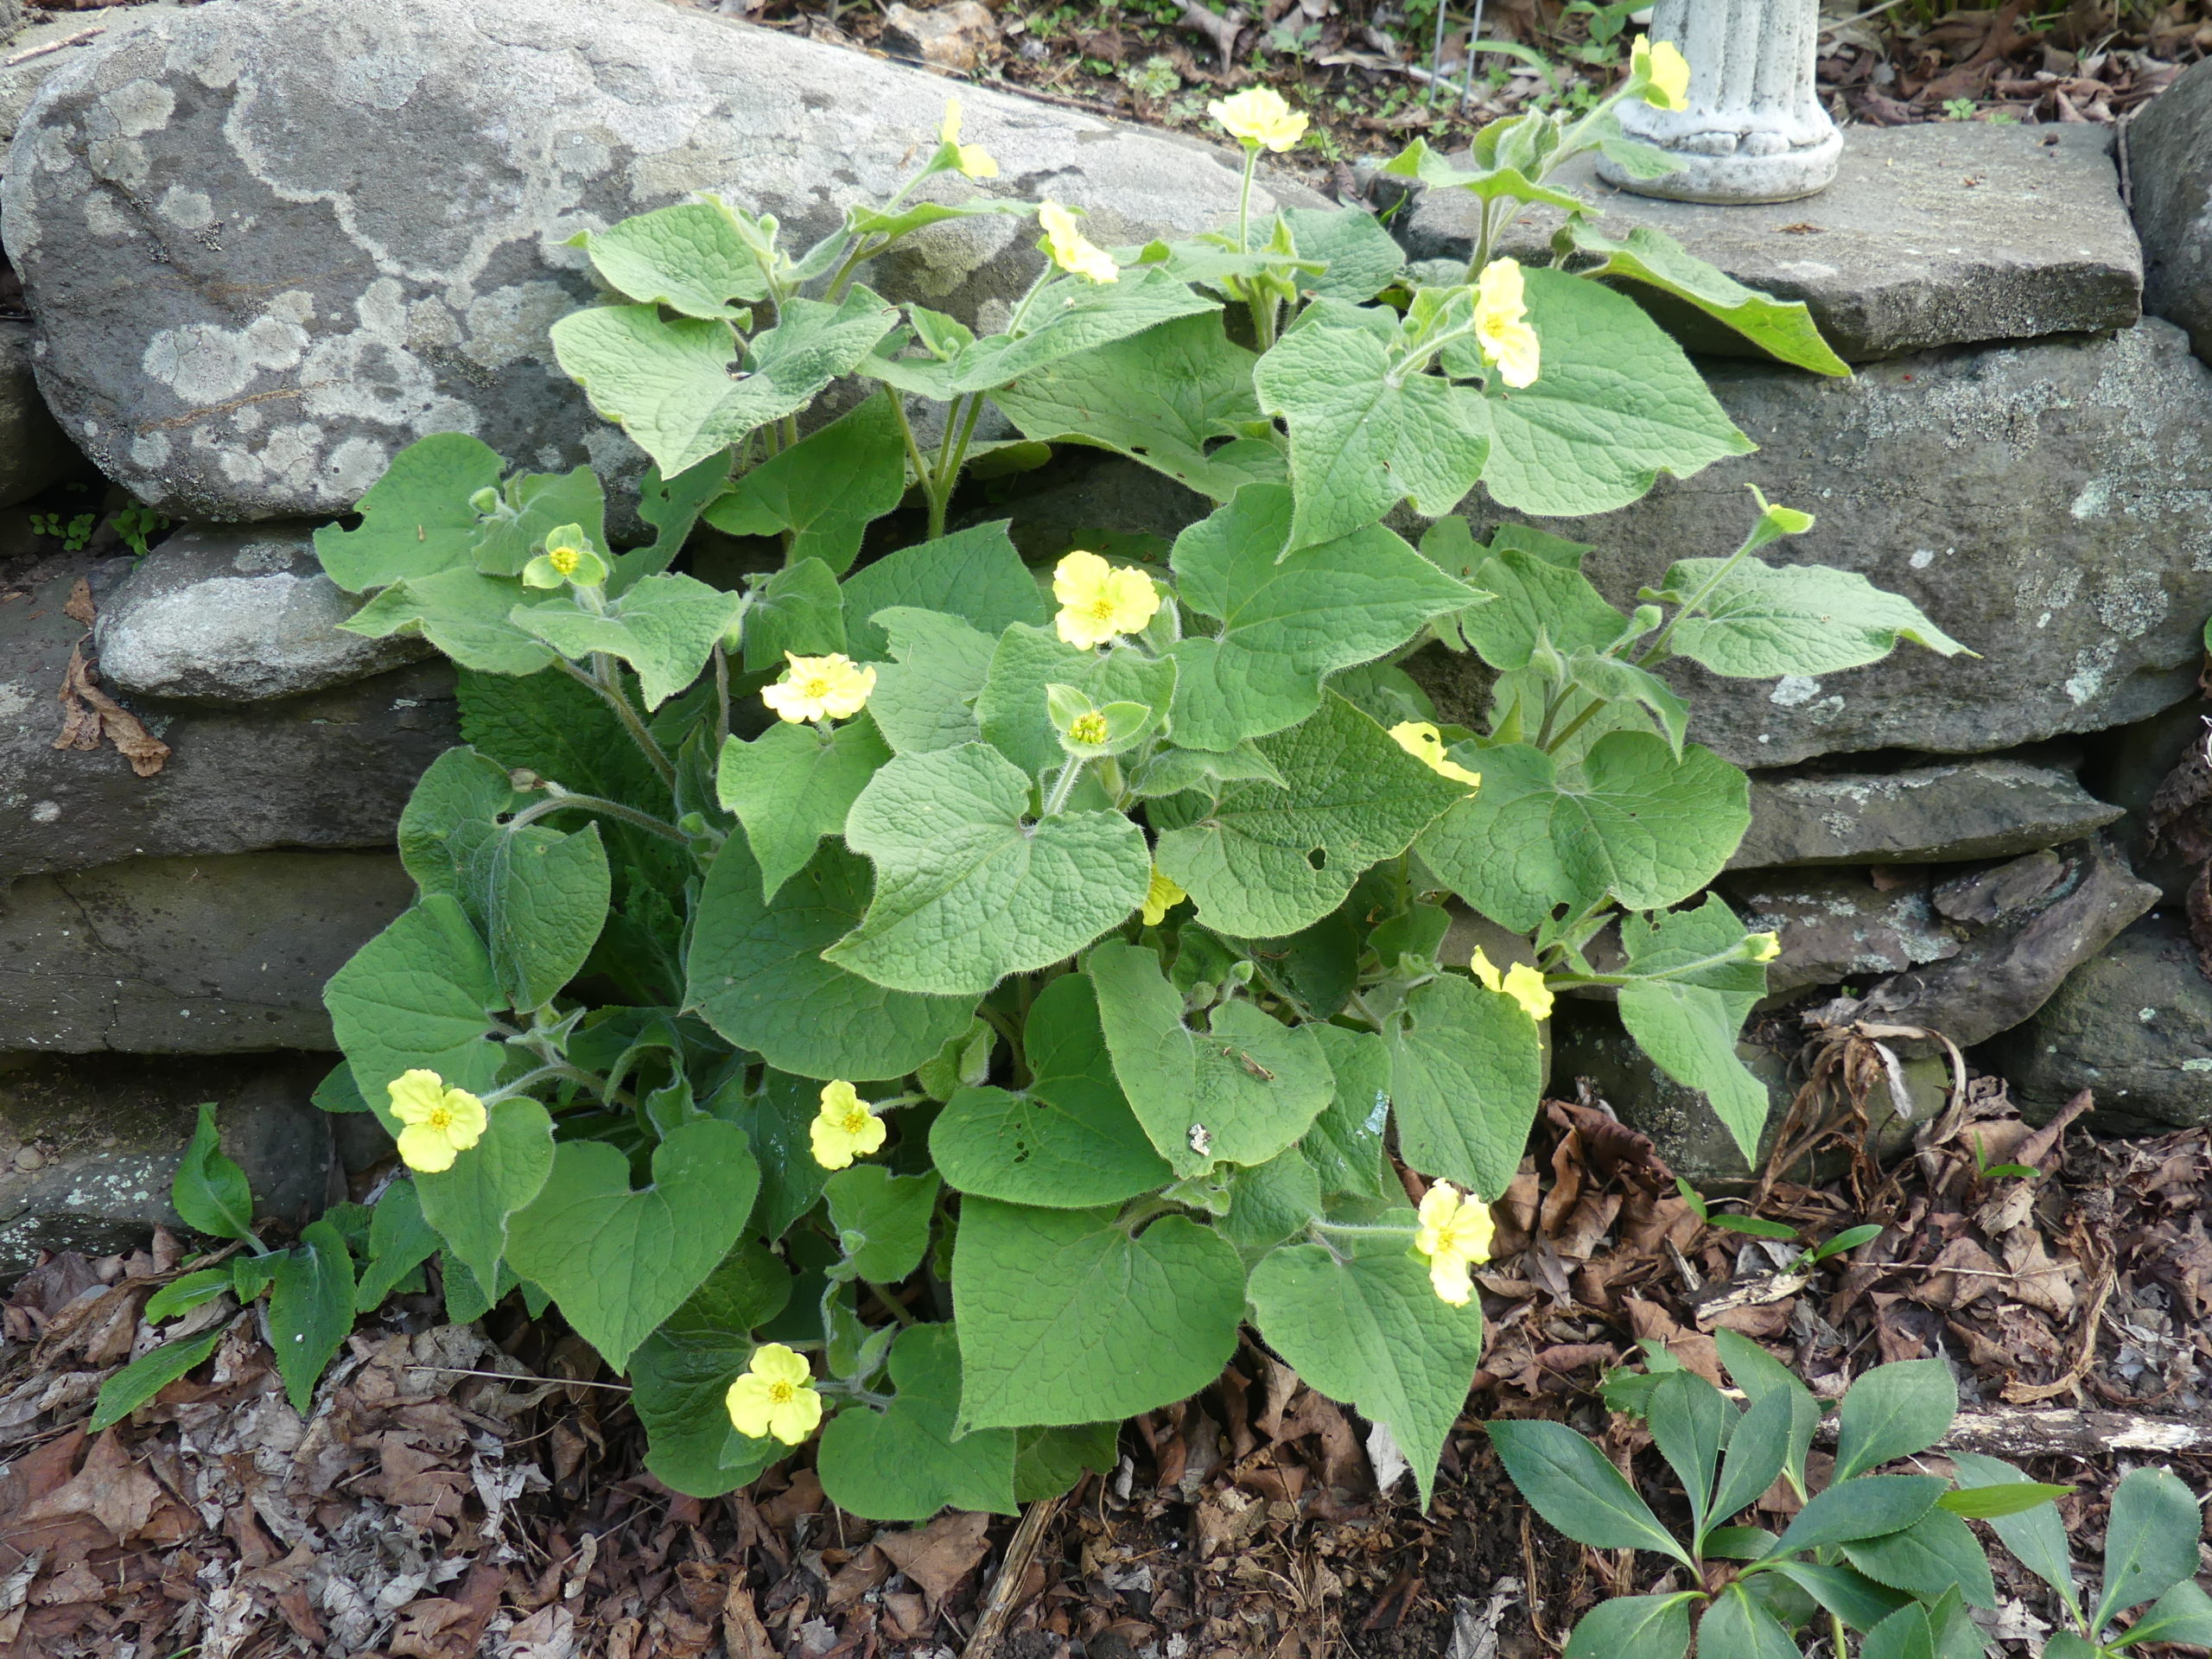 Saruma henryi, or the upright wild ginger, is a delightful plant for the shaded garden. The plant grows to about 15 inches and is covered with half-inch yellow flowers. Removing spent flowers will result in 3 weeks of blooms.